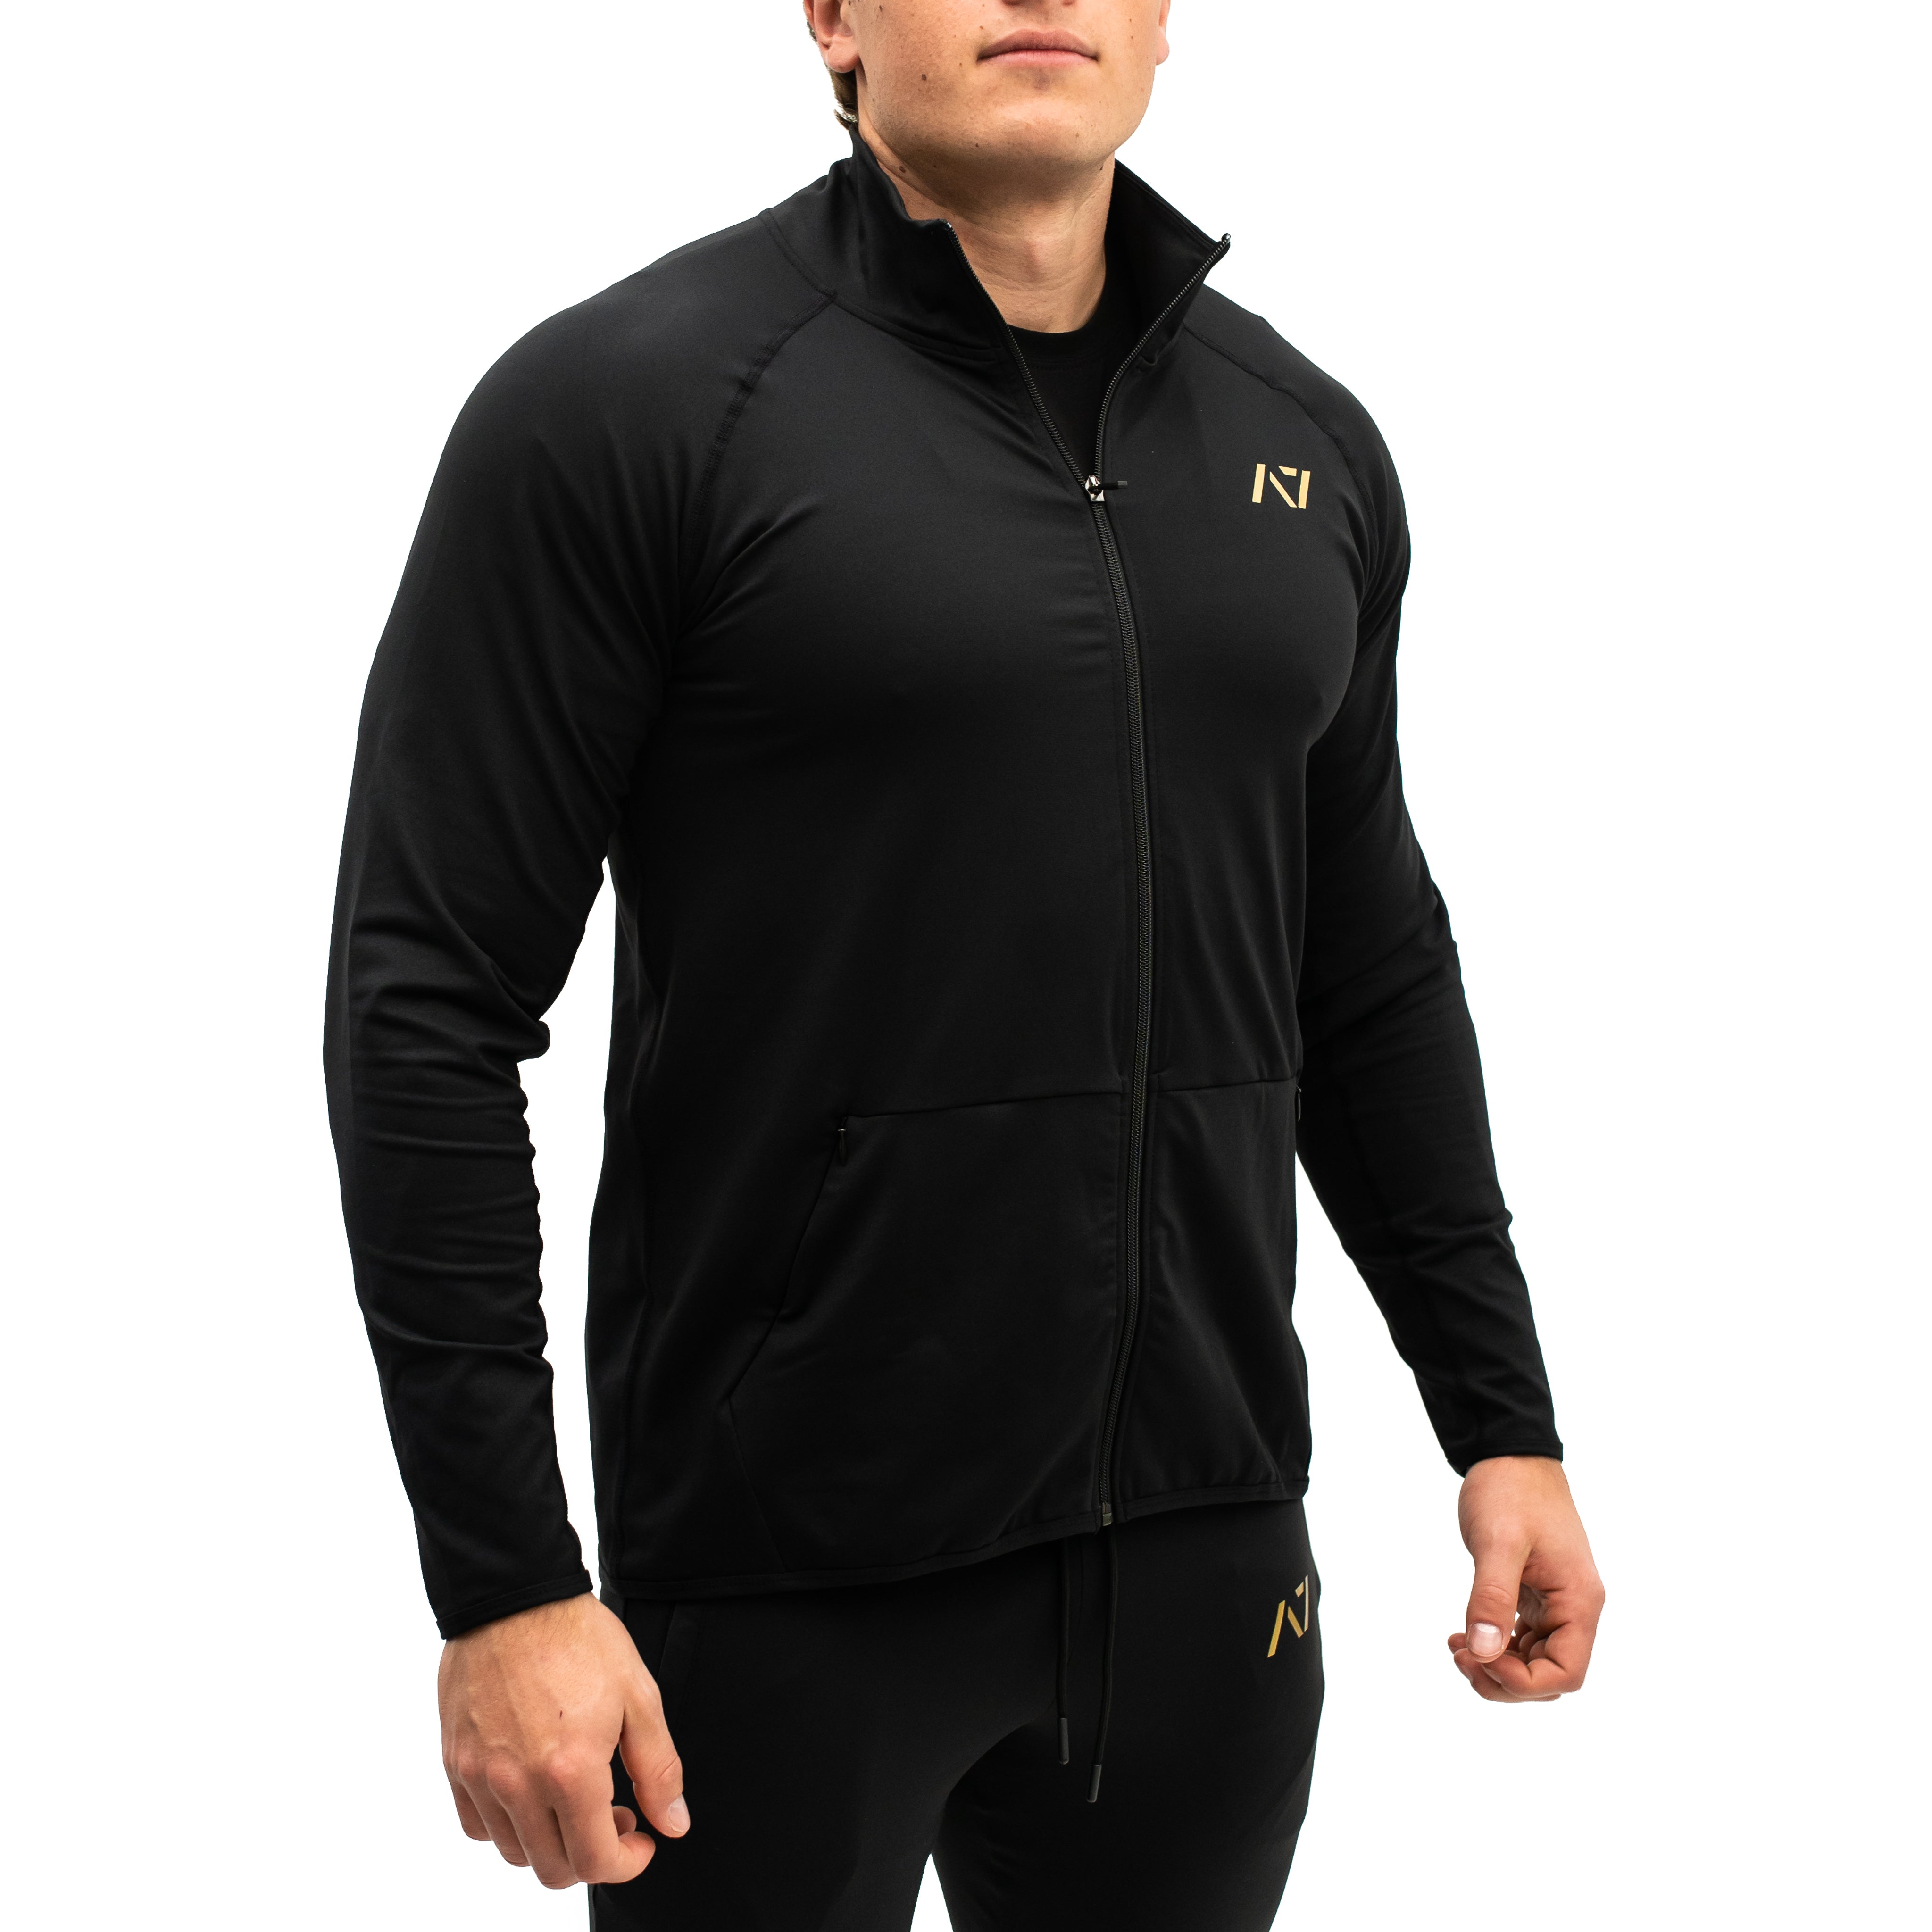 Whether going on a hike or heading to the gym our Defy Jacket will keep you cosy and comfortable. The jackets are made with premium moisture- 4-way-stretch material for a greater range of motion. These are a great fit for both men and women. Purchase Gold Standard Defy jacket from A7 UK shipping to UK or A7 Europe shipping to EU.